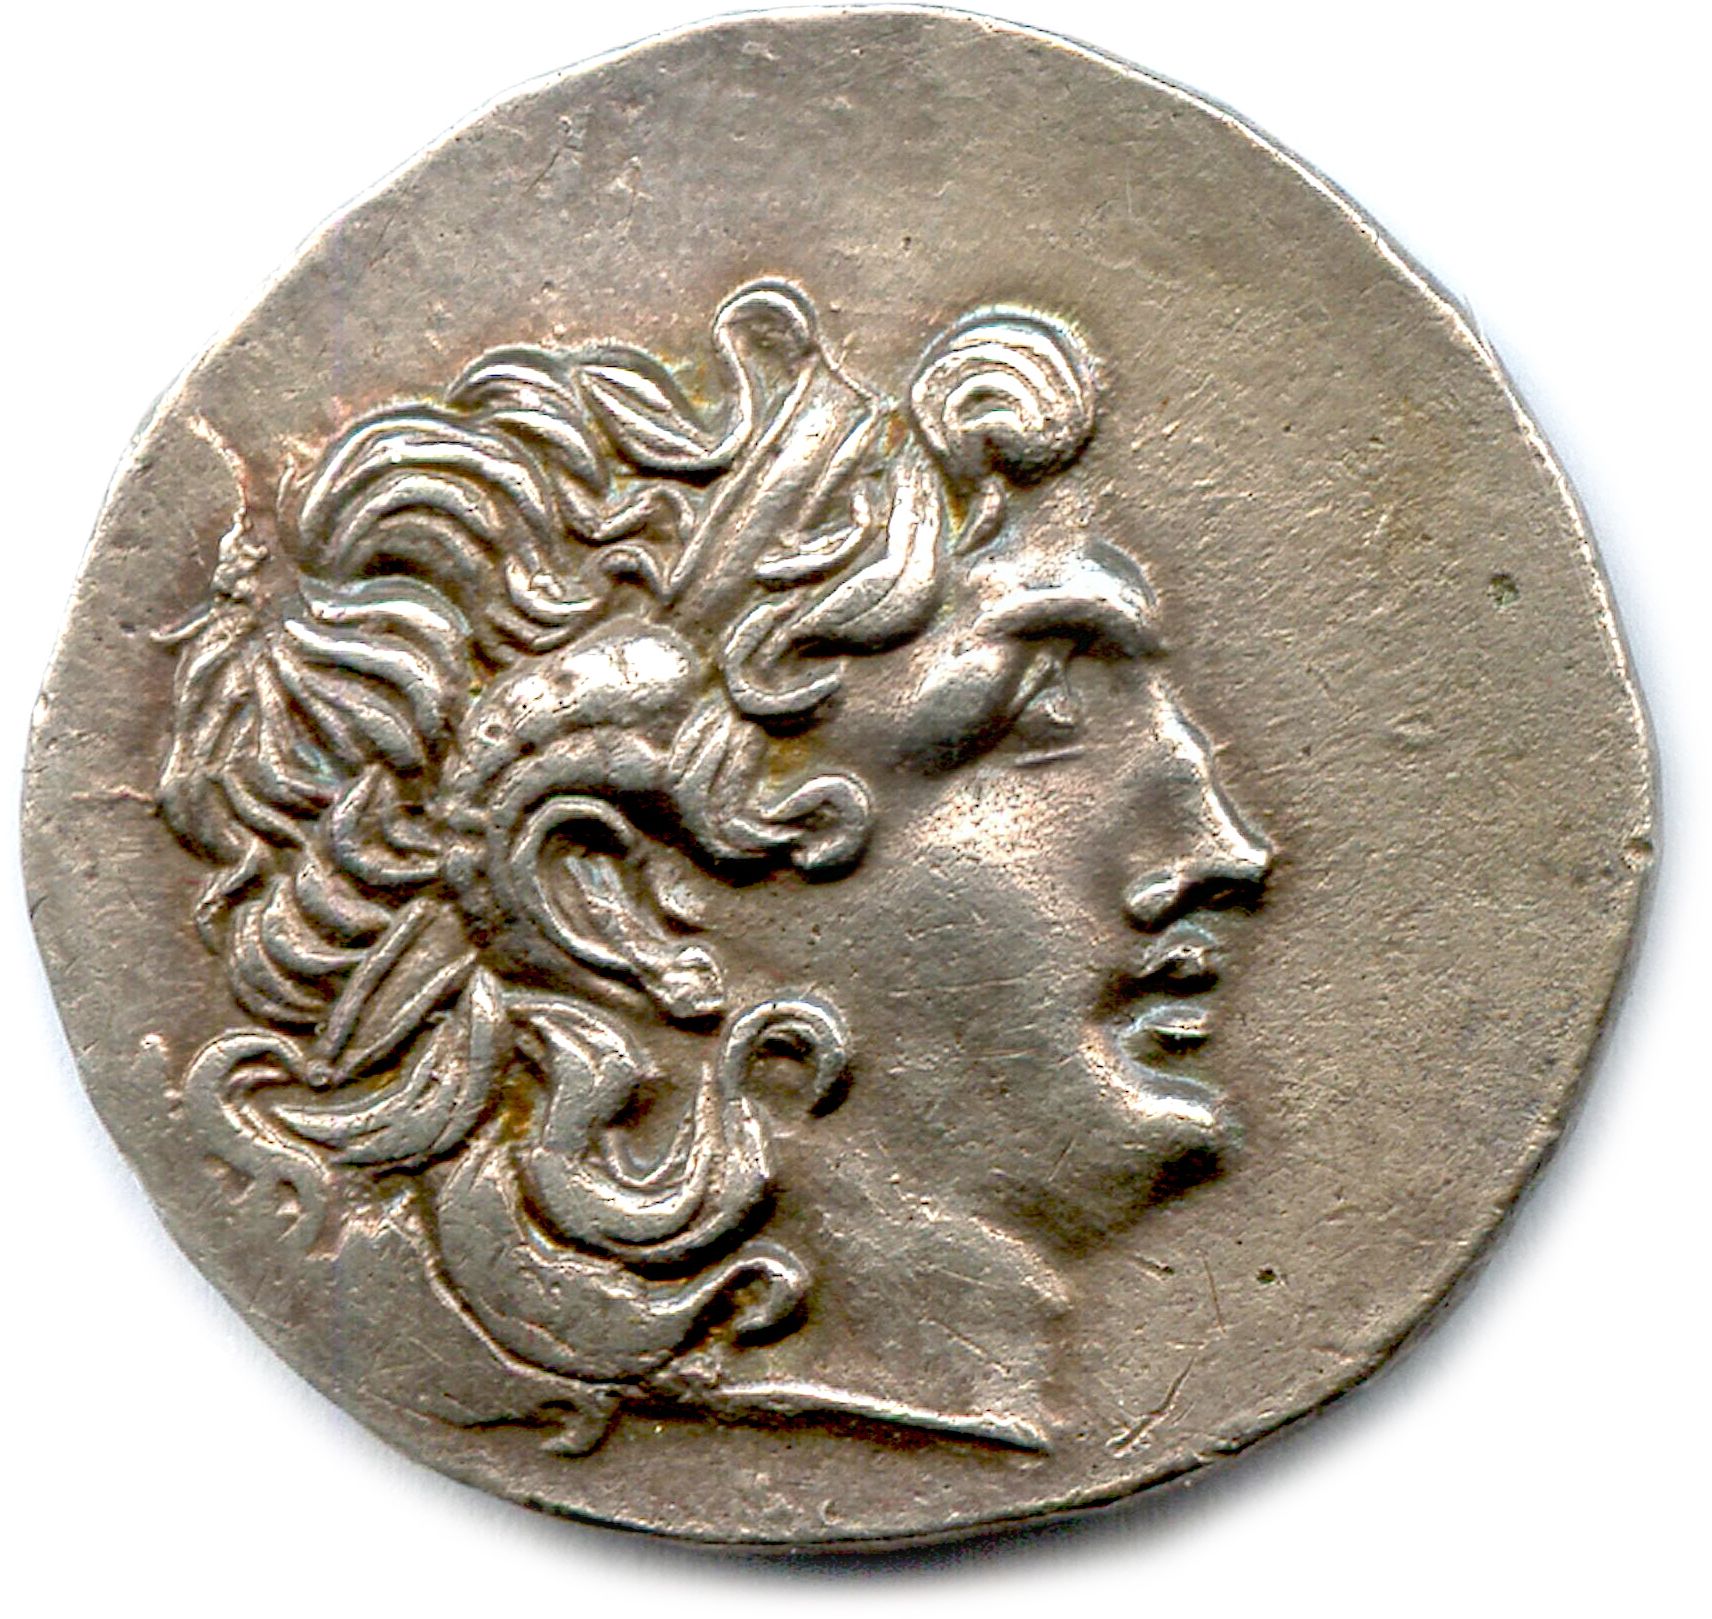 Null KINGDOM OF THRACE - LYSIMACHUS 305-281

Divinized head of Alexander with th&hellip;